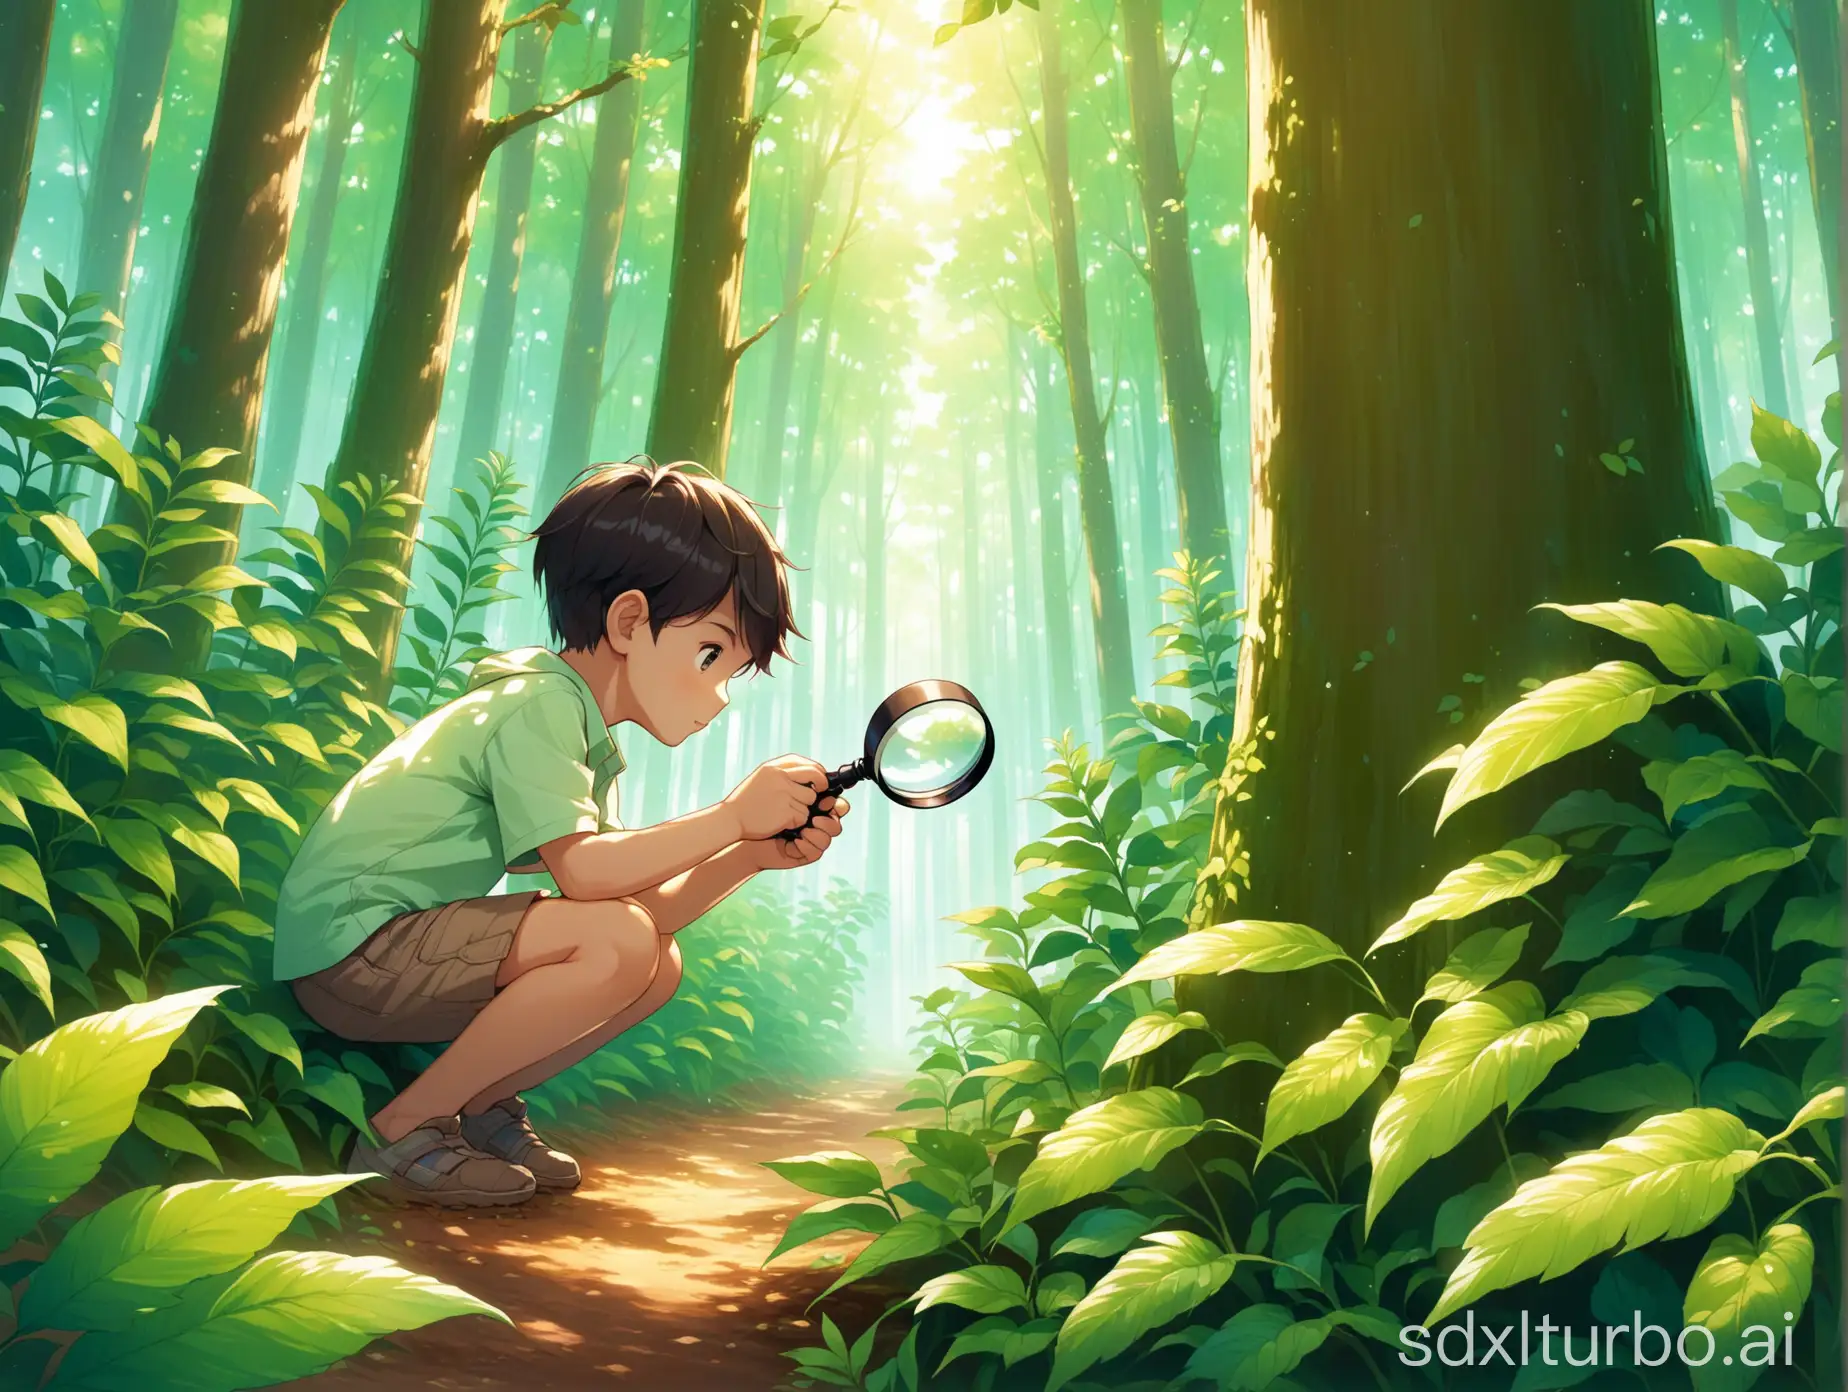 Young-Botanist-Exploring-Nature-with-Magnifying-Glass-in-Forest